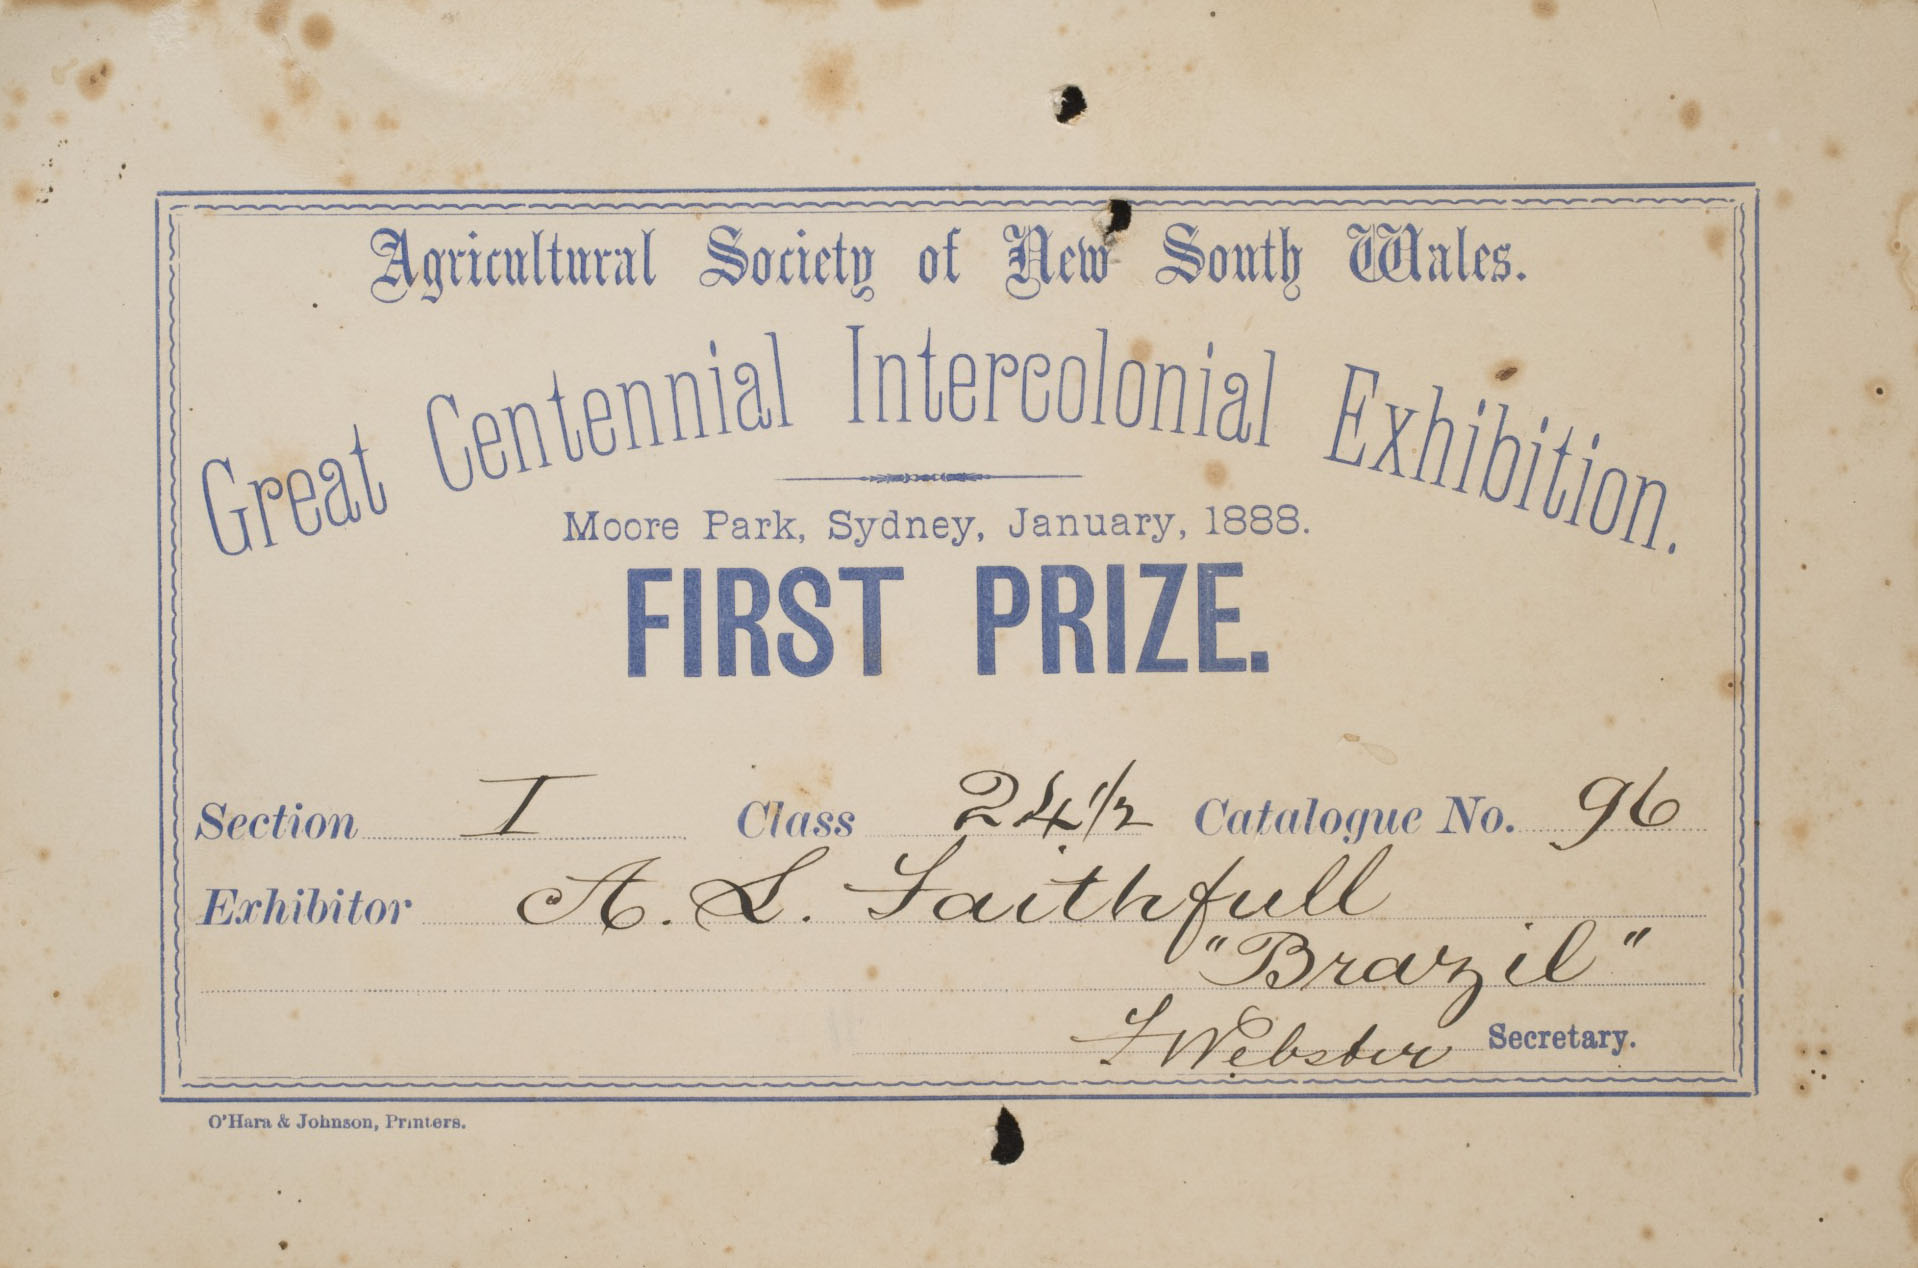 Prize card awarded by the ‘Agricultural Society of New South Wales’.